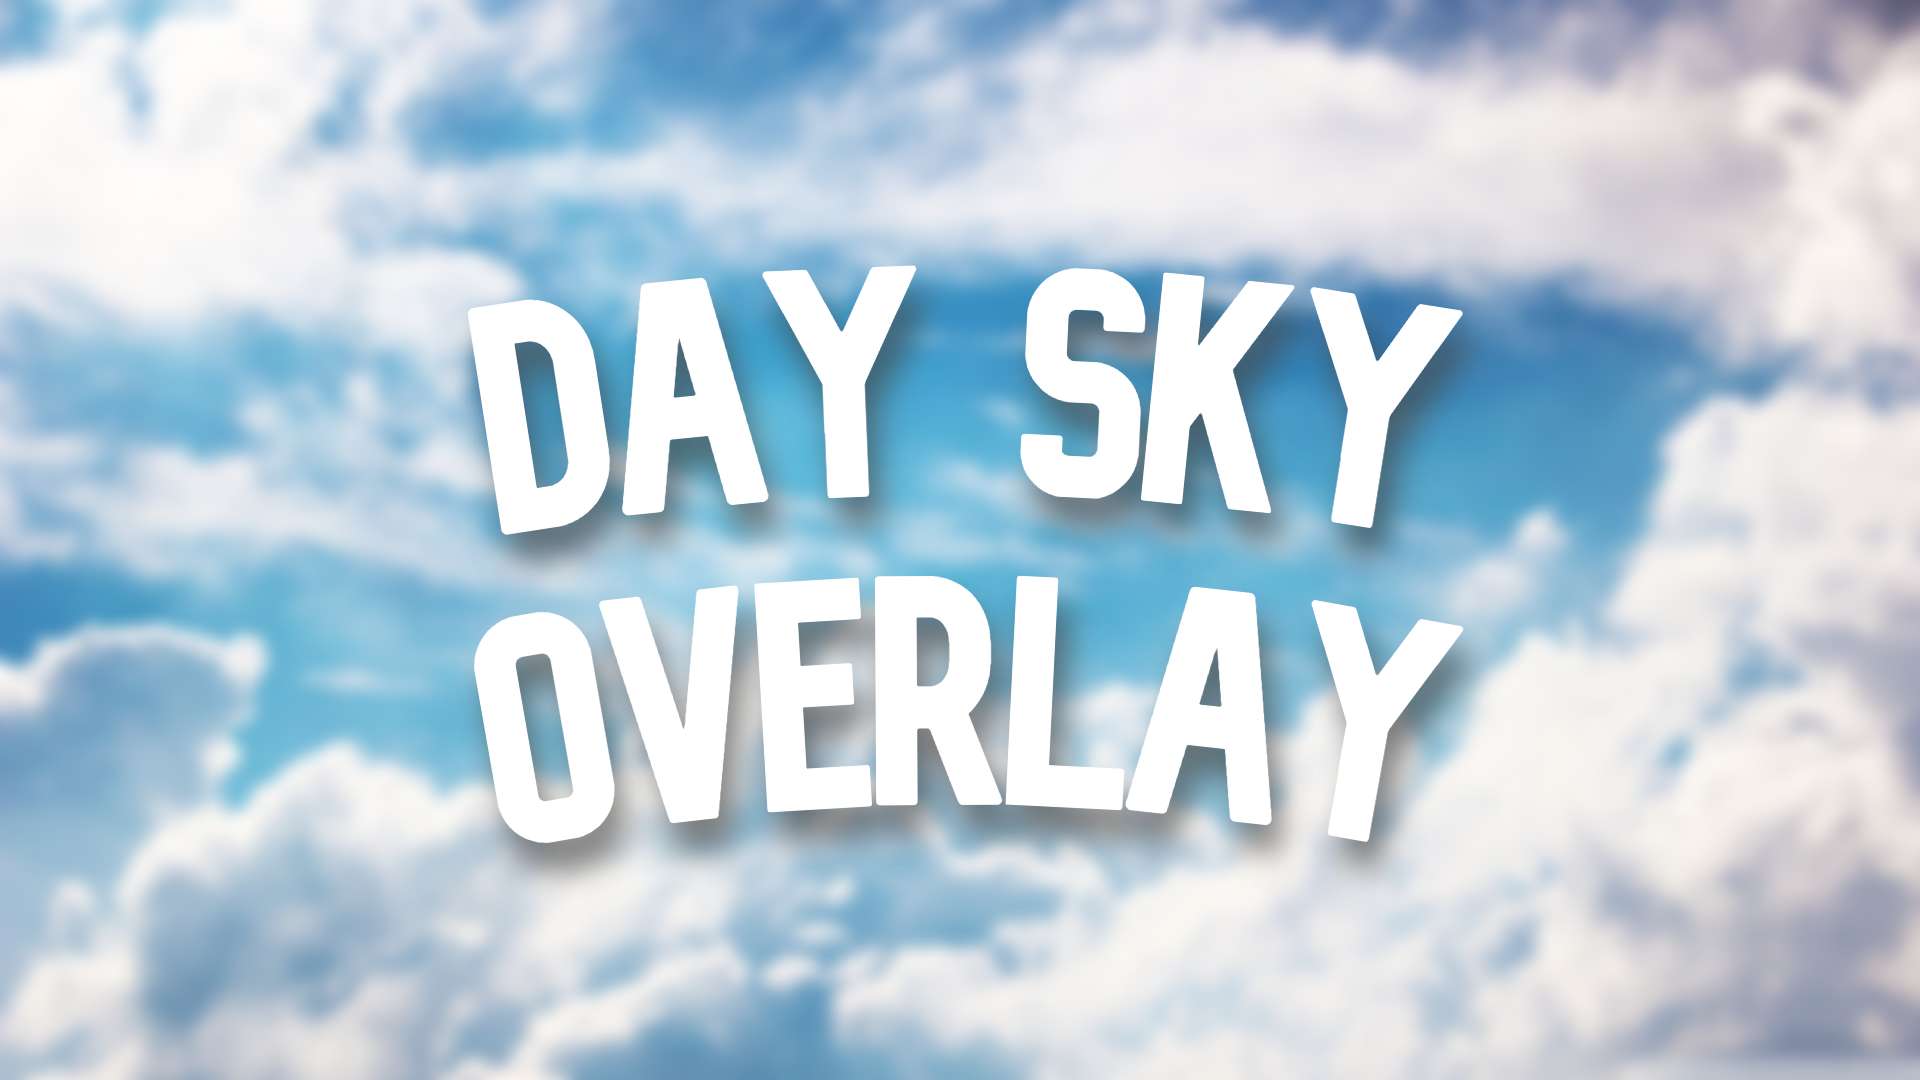 Day Sky Overlay #4 16 by rh56 on PvPRP